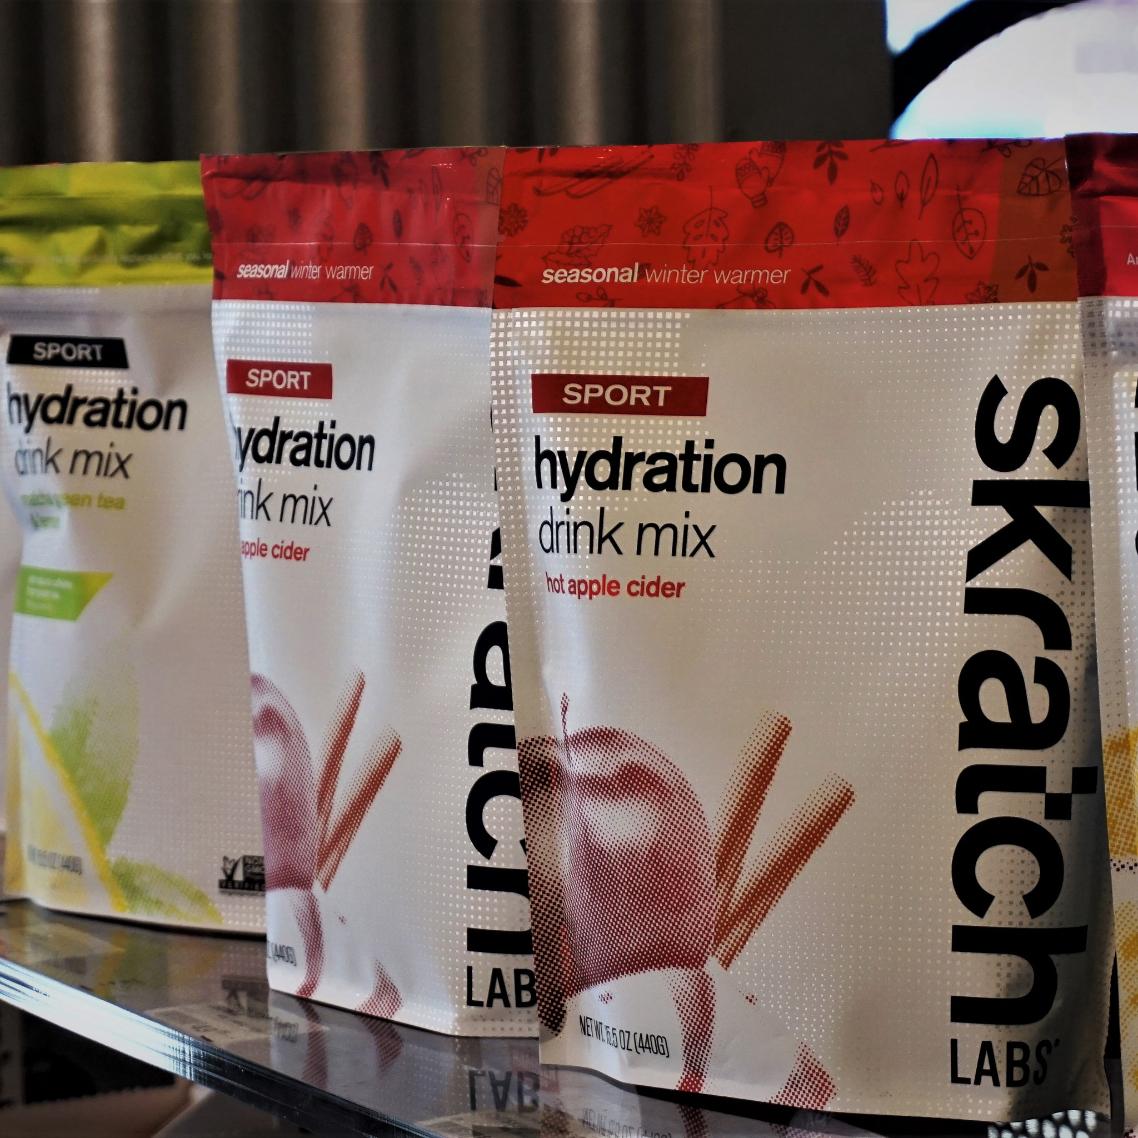 skratch hydration products